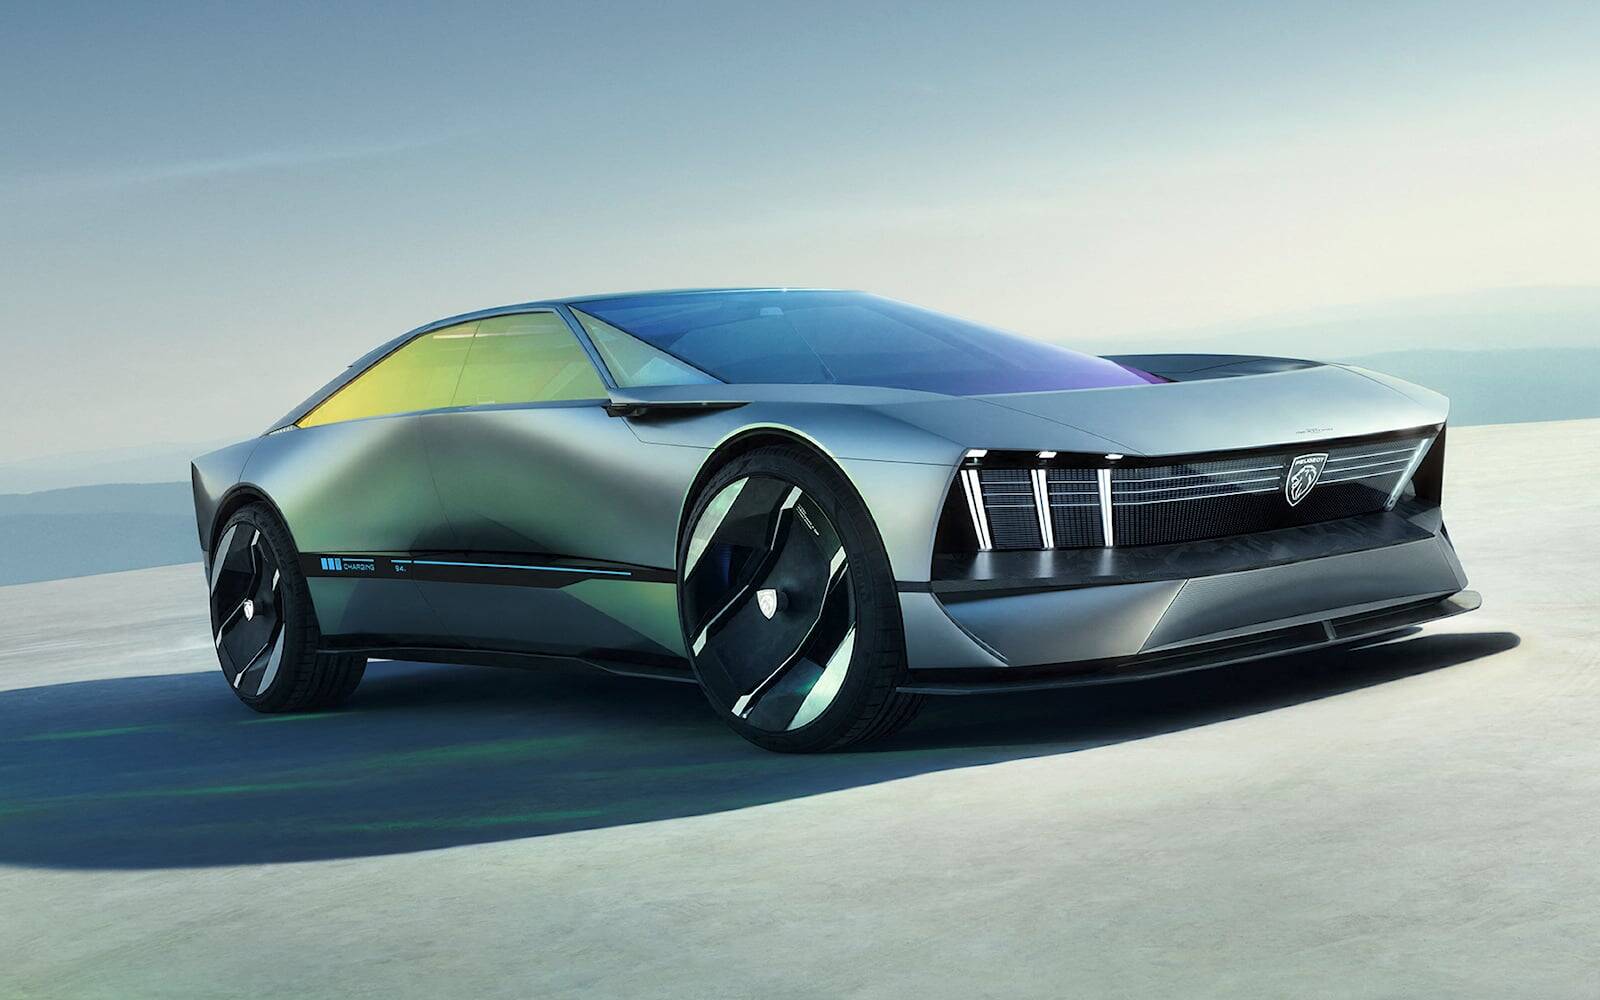 Peugeot Returns to North America to Display Stunning Concept at